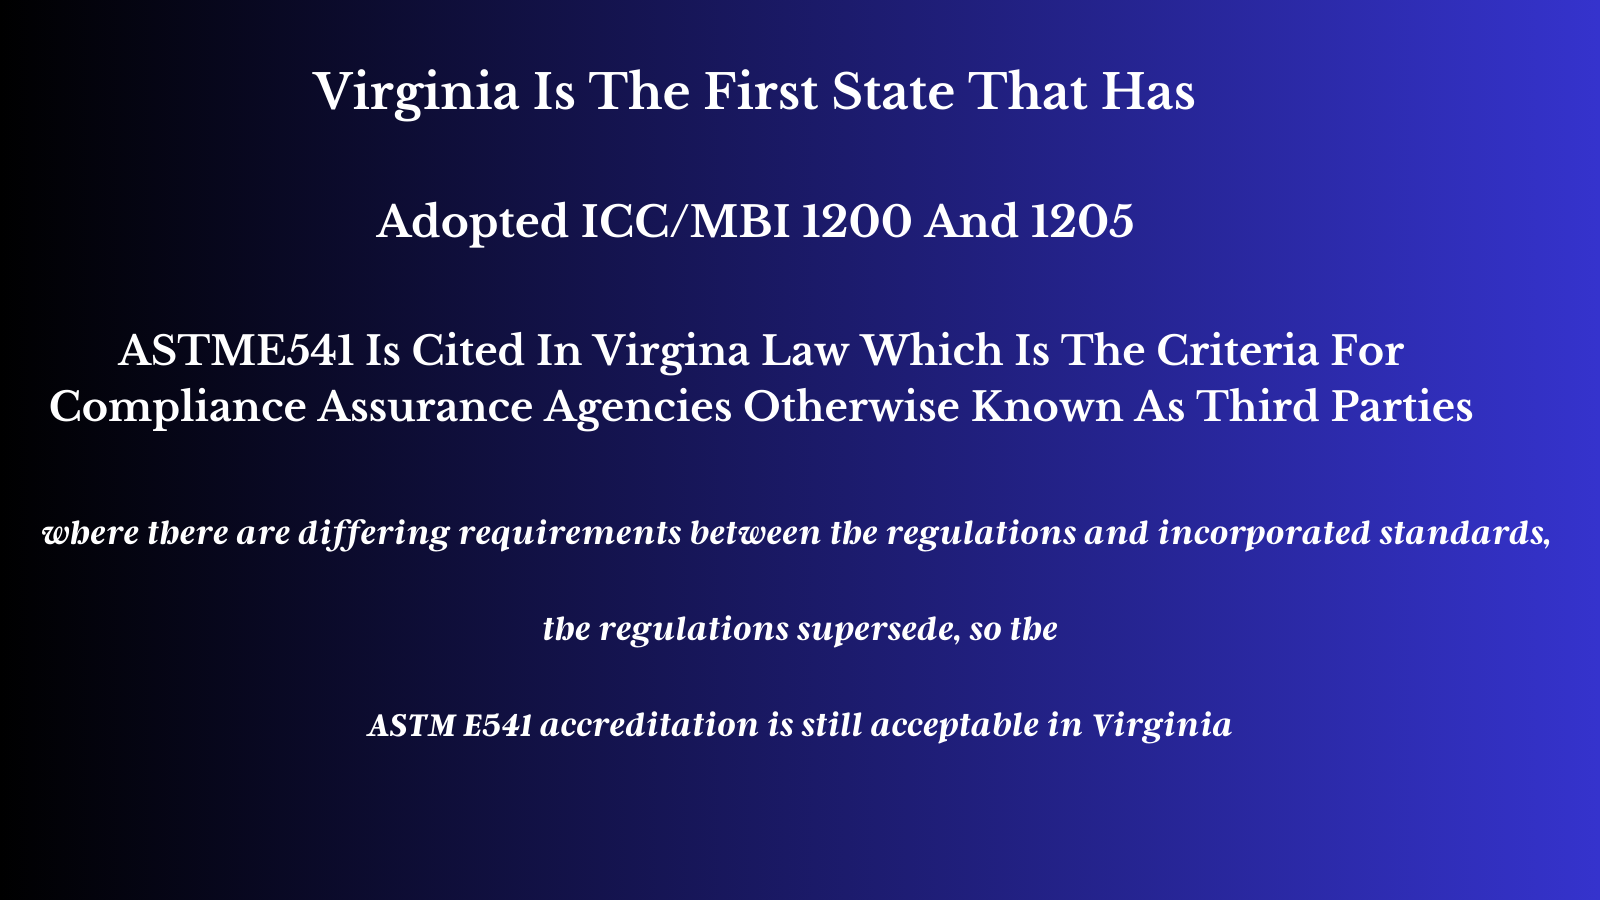 Virginia Adopts ICC/MBI 1200 And 1205 And ASTME541